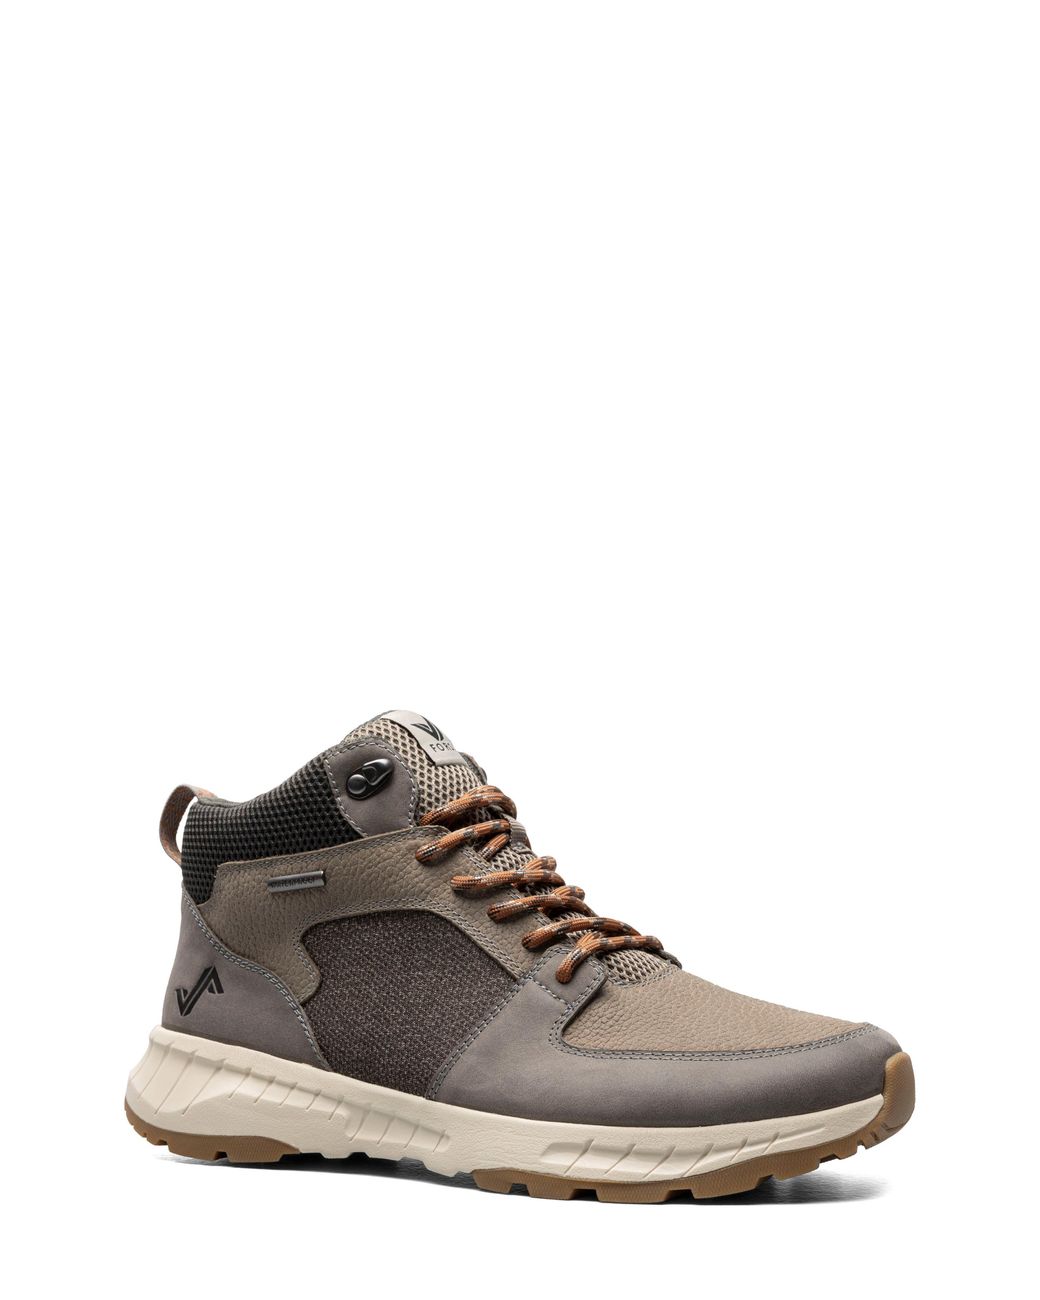 Forsake | Waterproof Sneaker Boots and Hiking Shoes